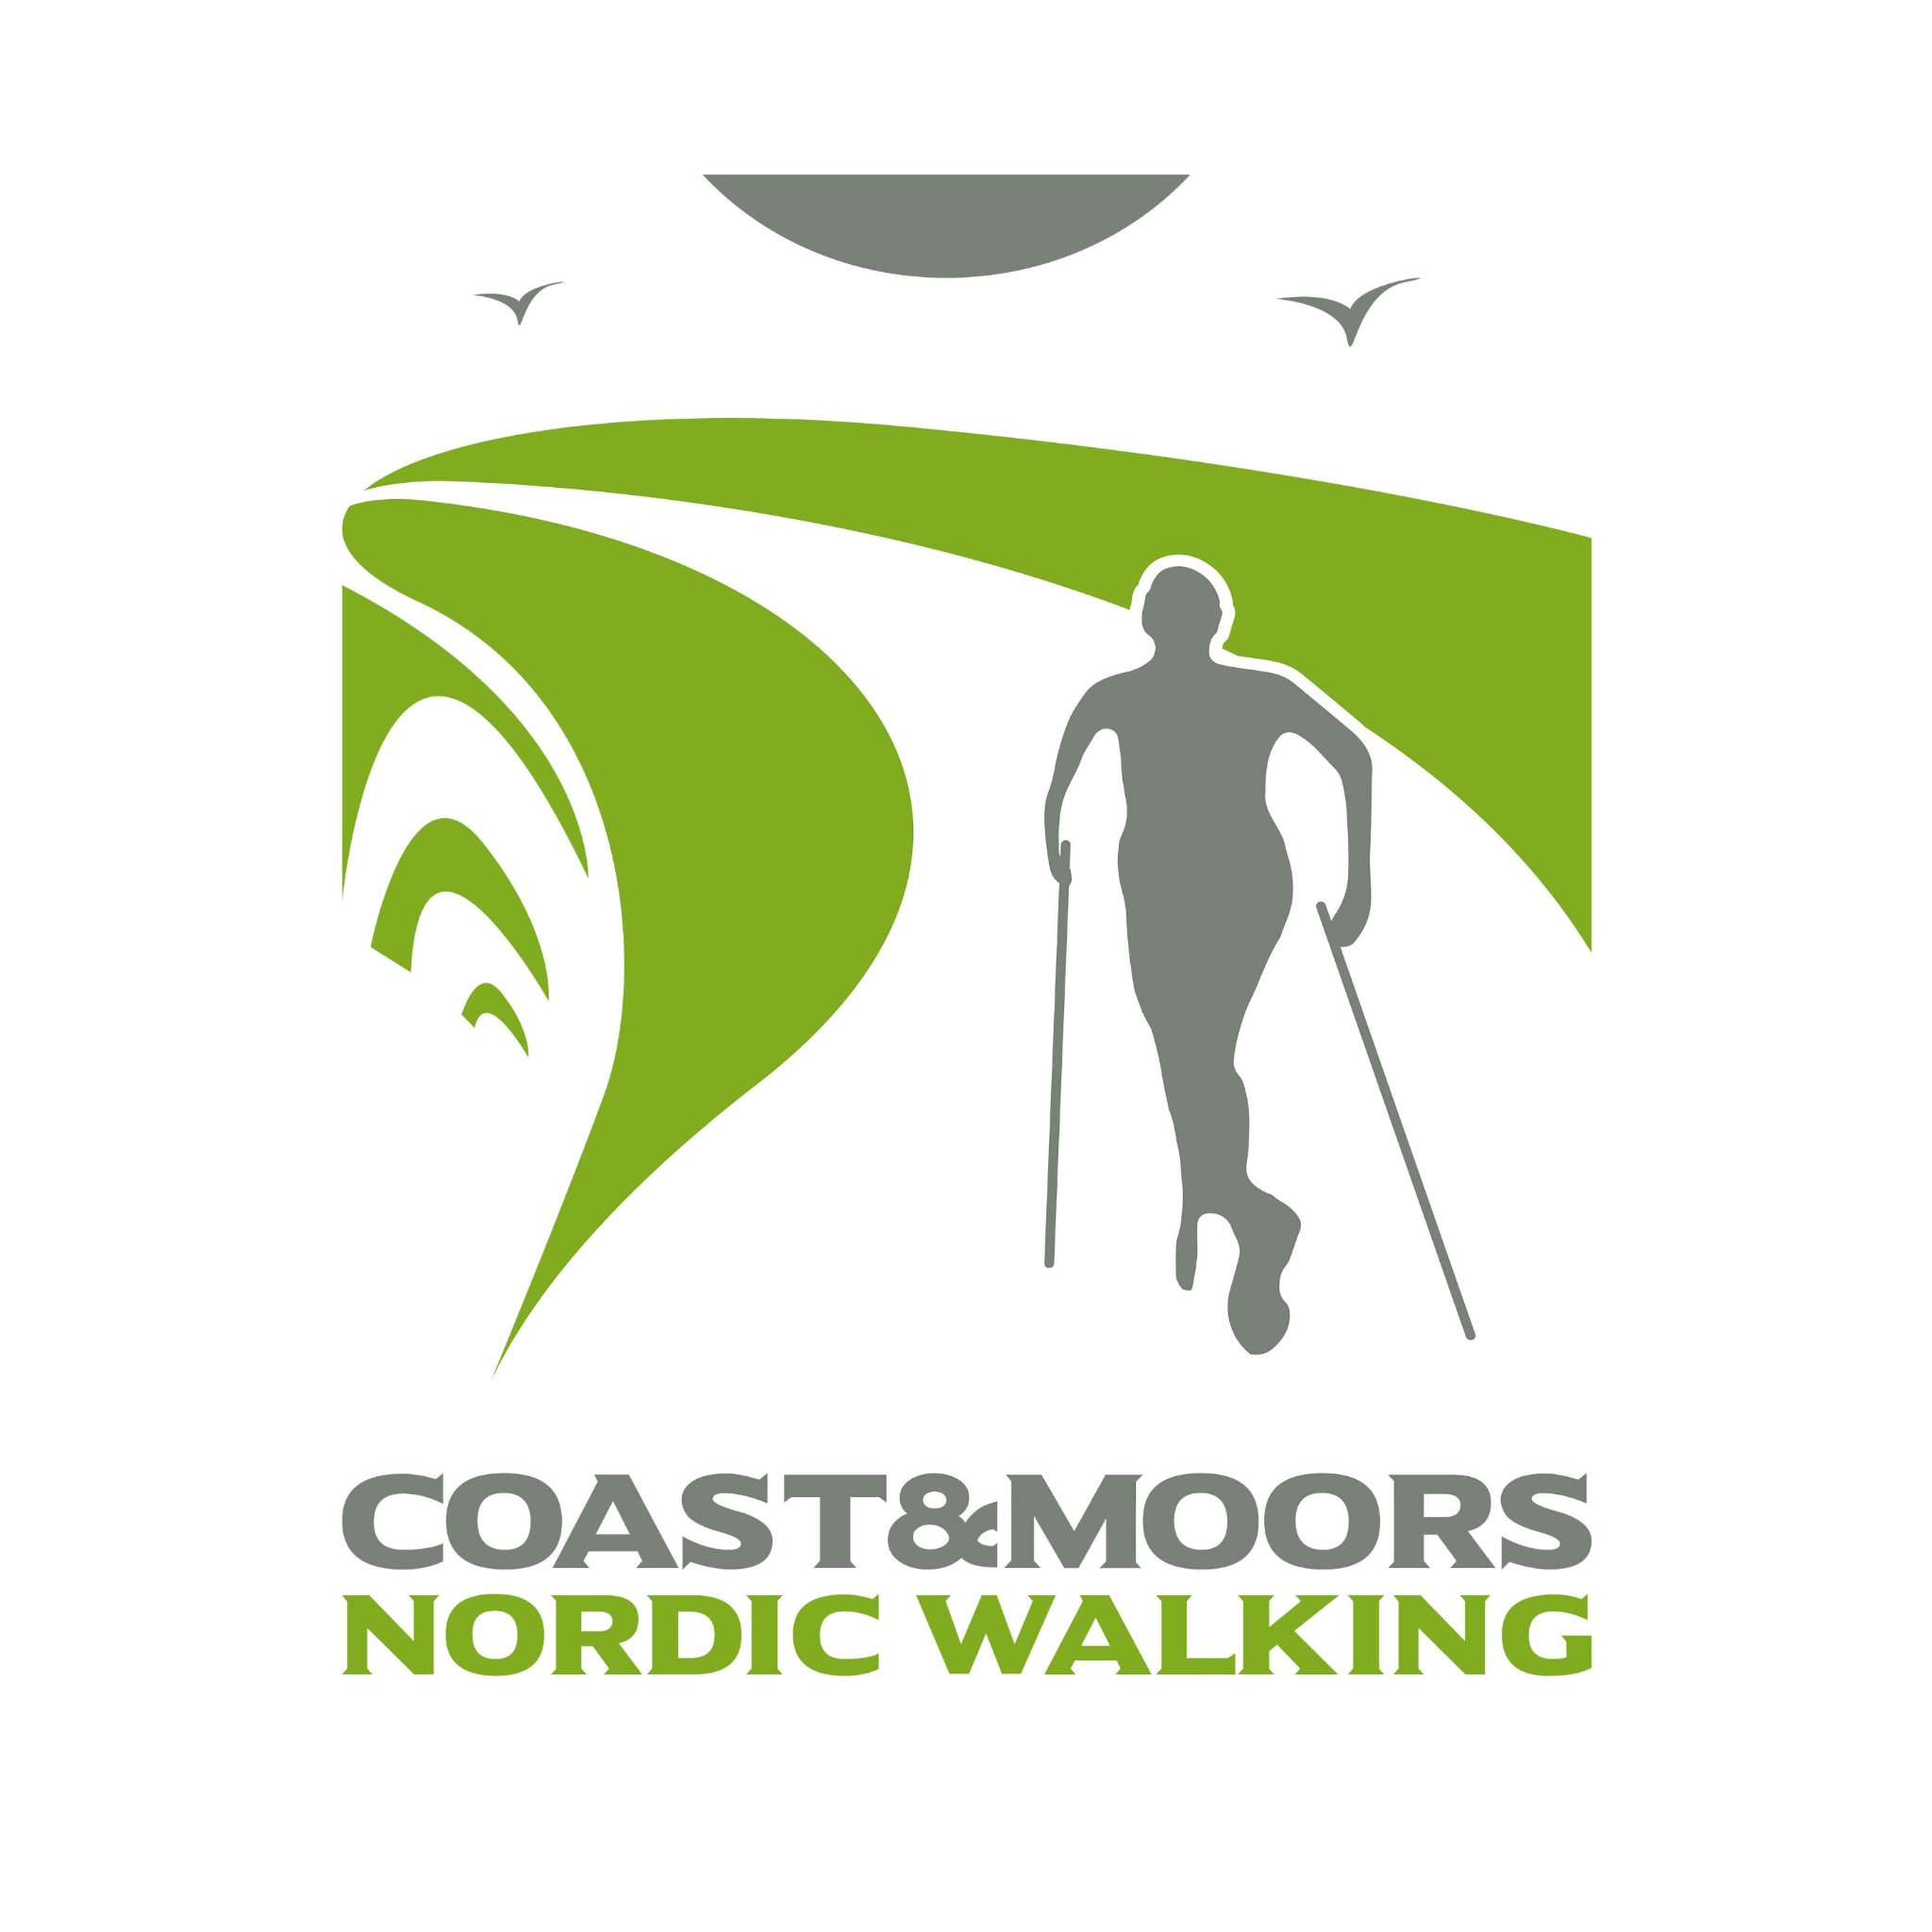 We are qualified and experienced #NordicWalking instructors. We coach and guide walkers across #Saltburn, #Redcar, #Guisborough & the #NorthYorkshireMoors.